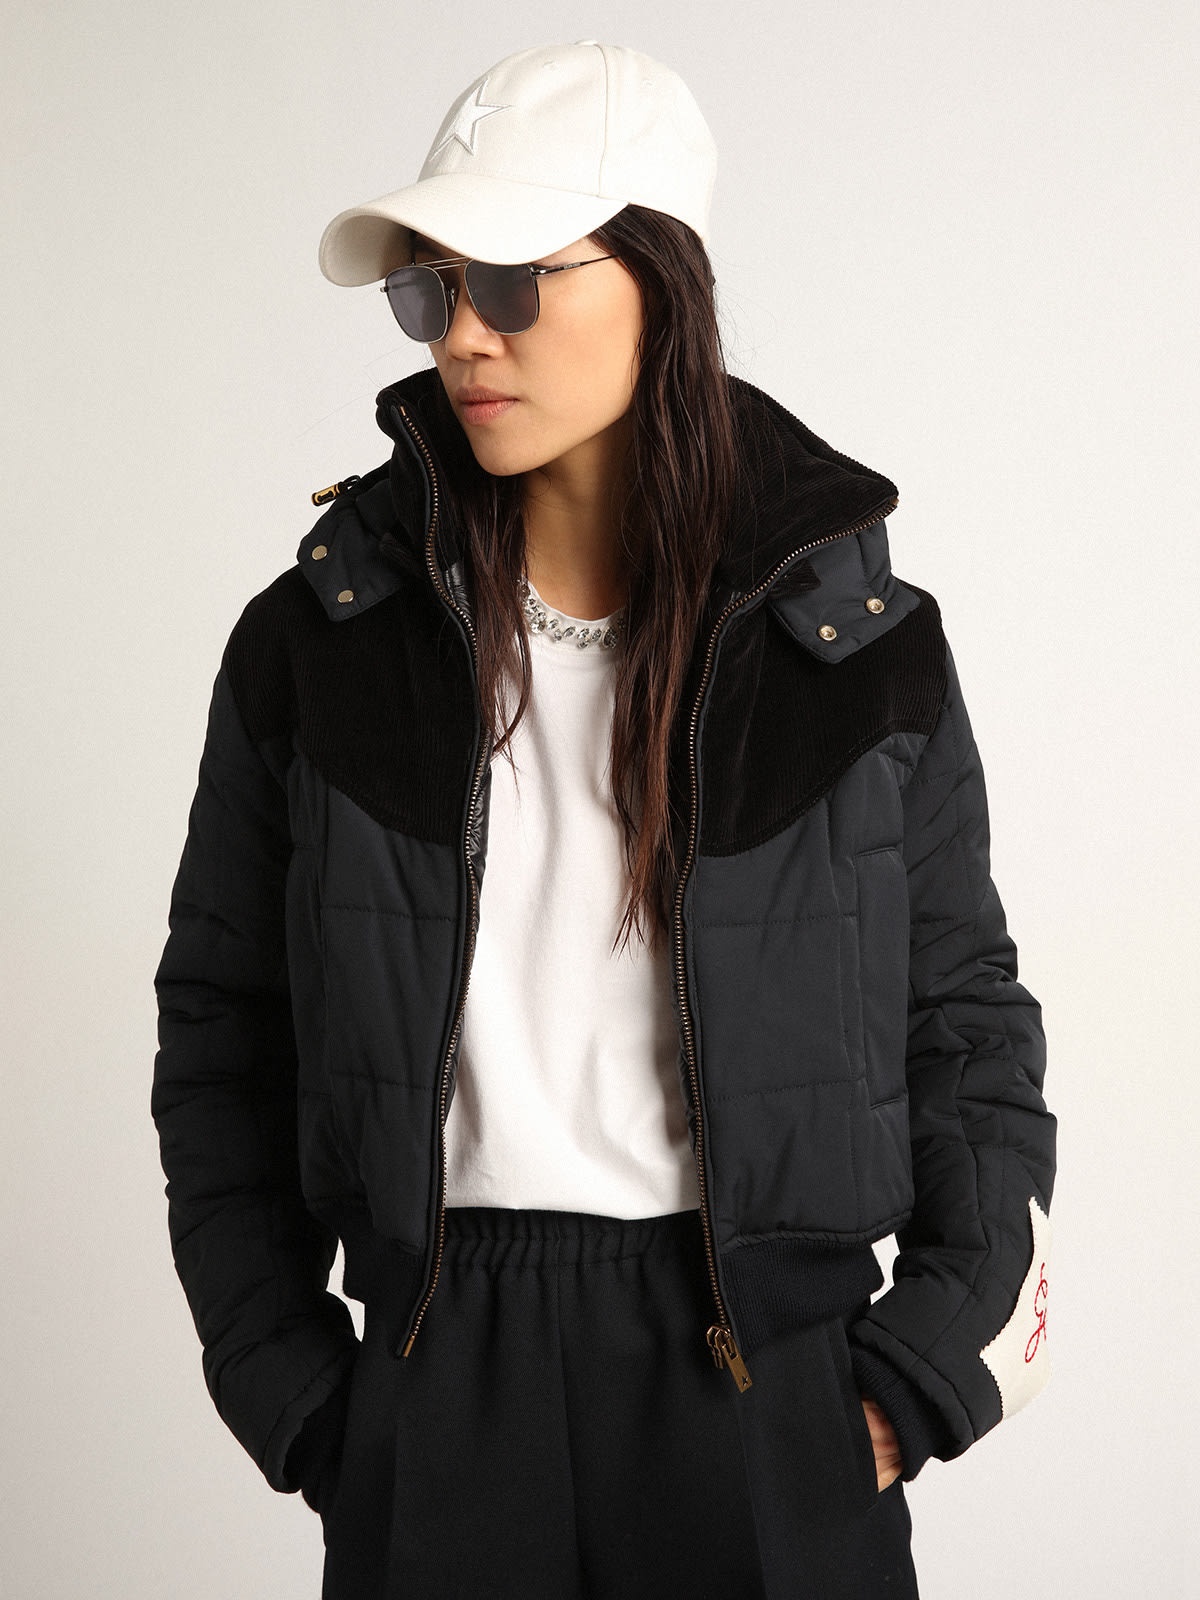 Women's black ankle-length padded jacket with hood